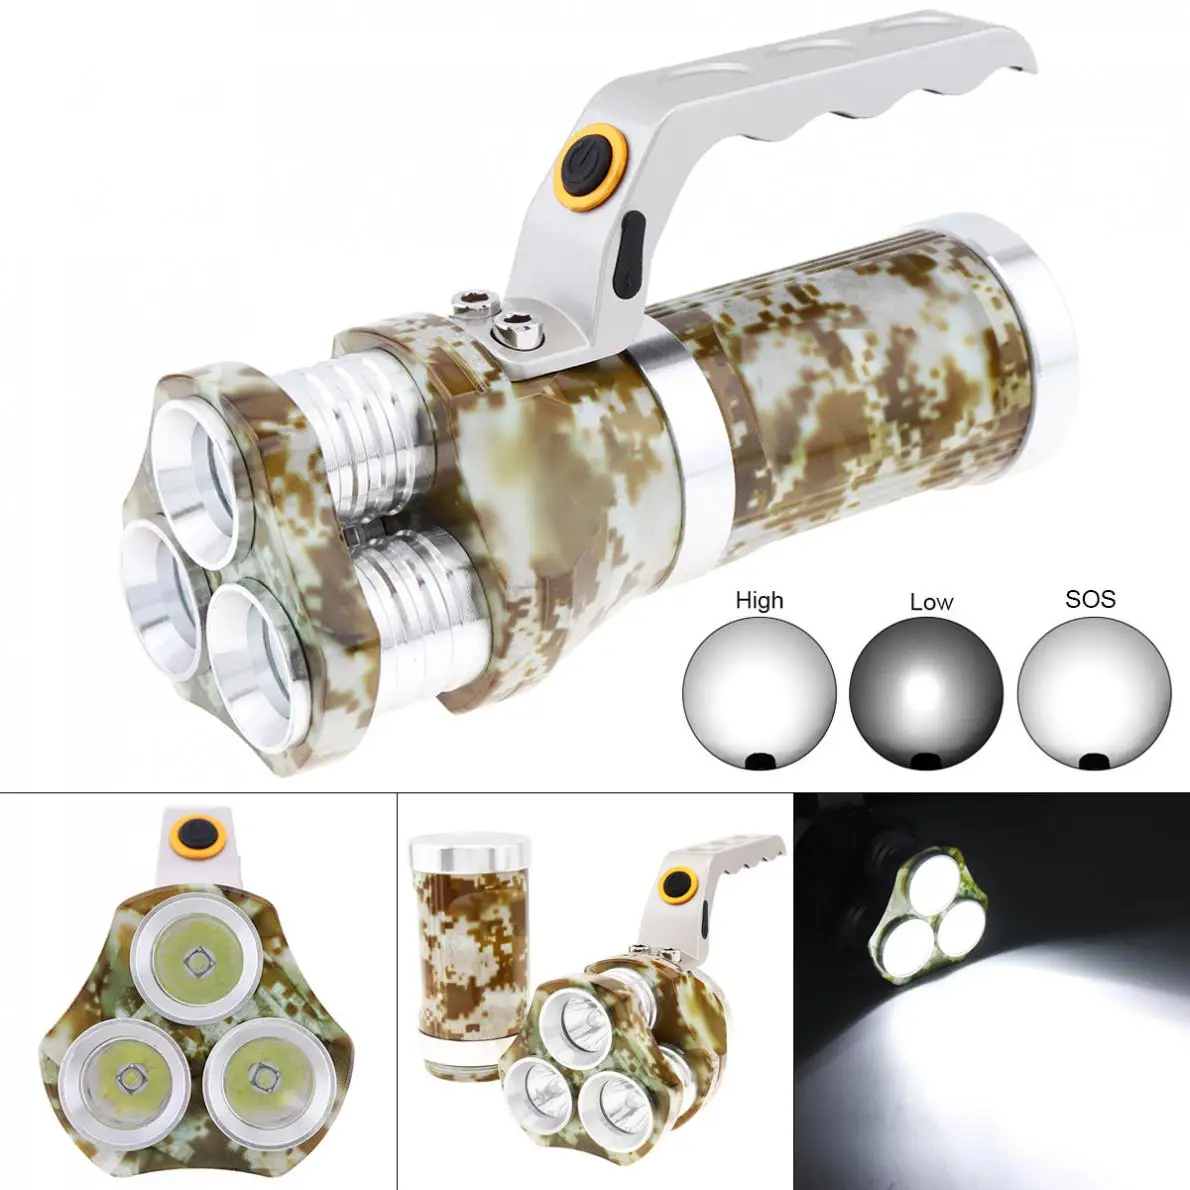 

Waterproof 3 Modes Light 3000 Lumens 3 XML-T6 LED Handheld Torch Flashlight Searchlight Rechargeable for Outdoor Hunting